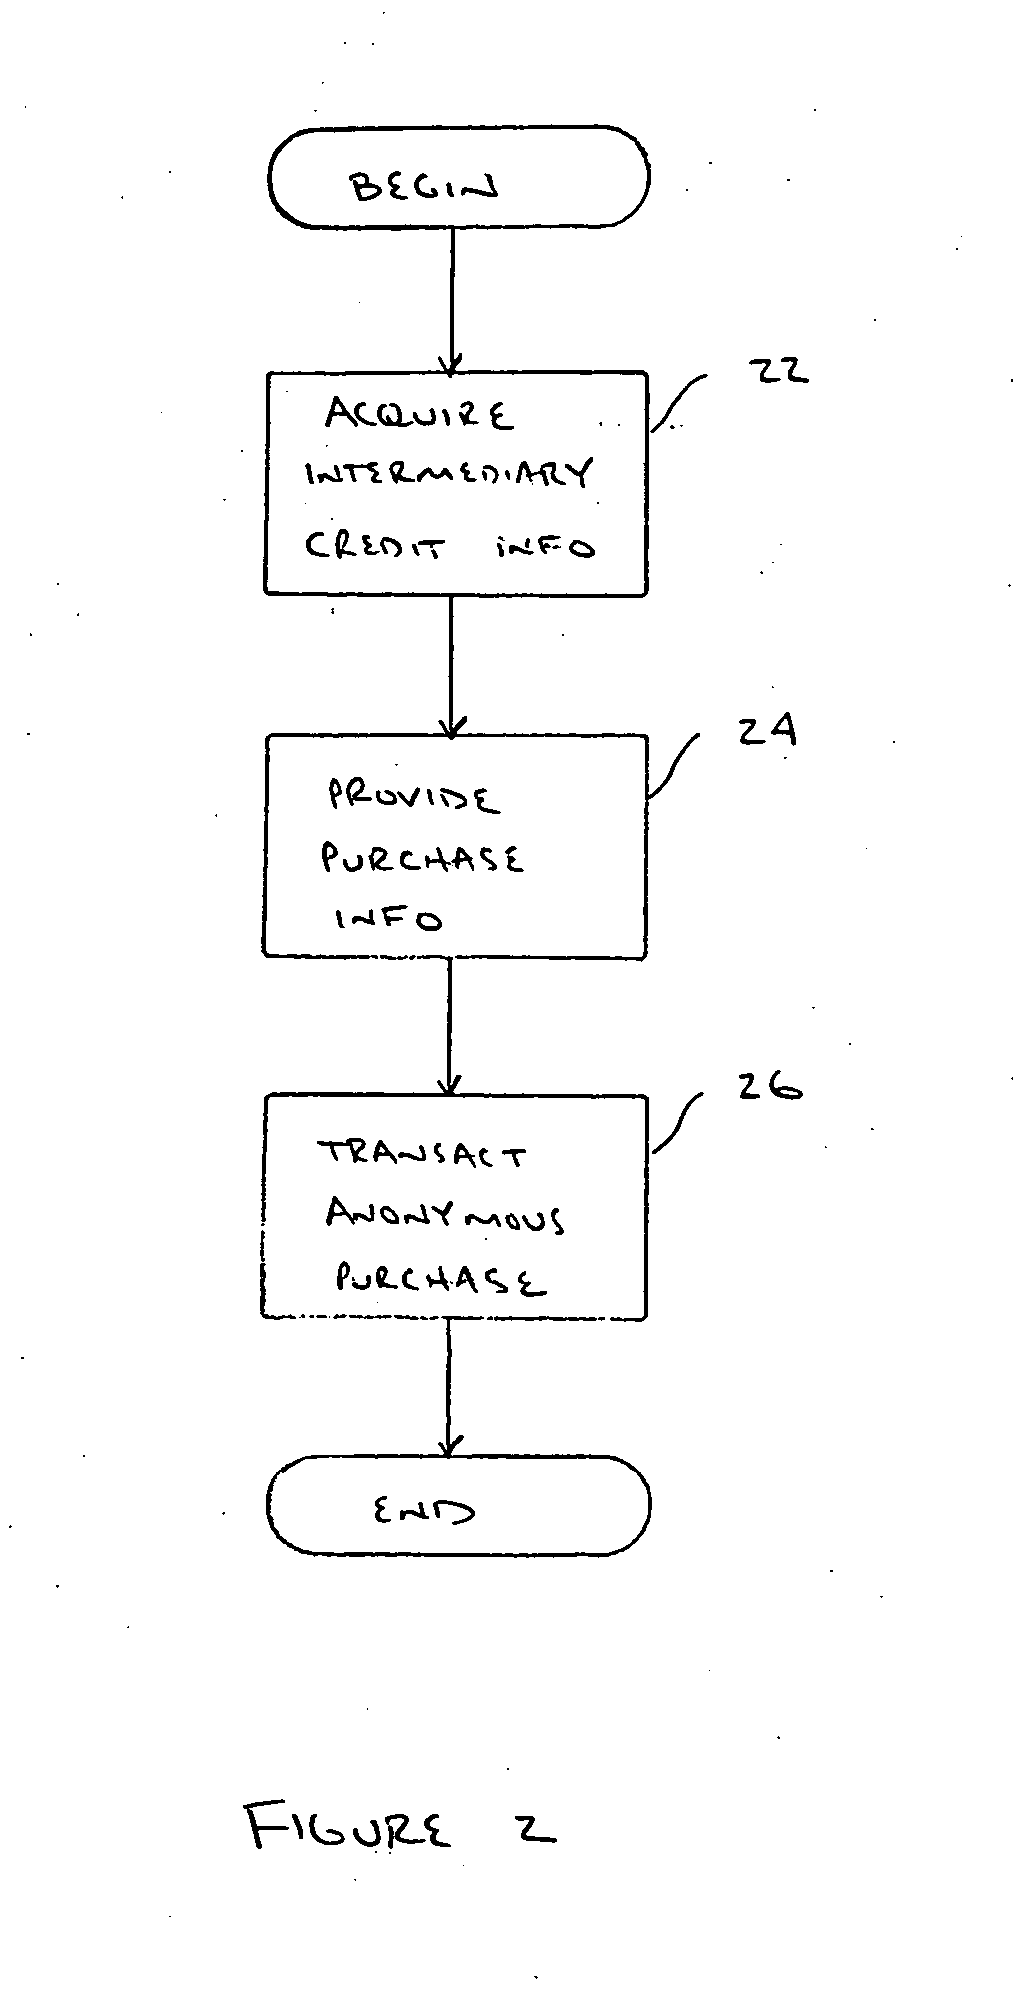 Method of transacting a purchase